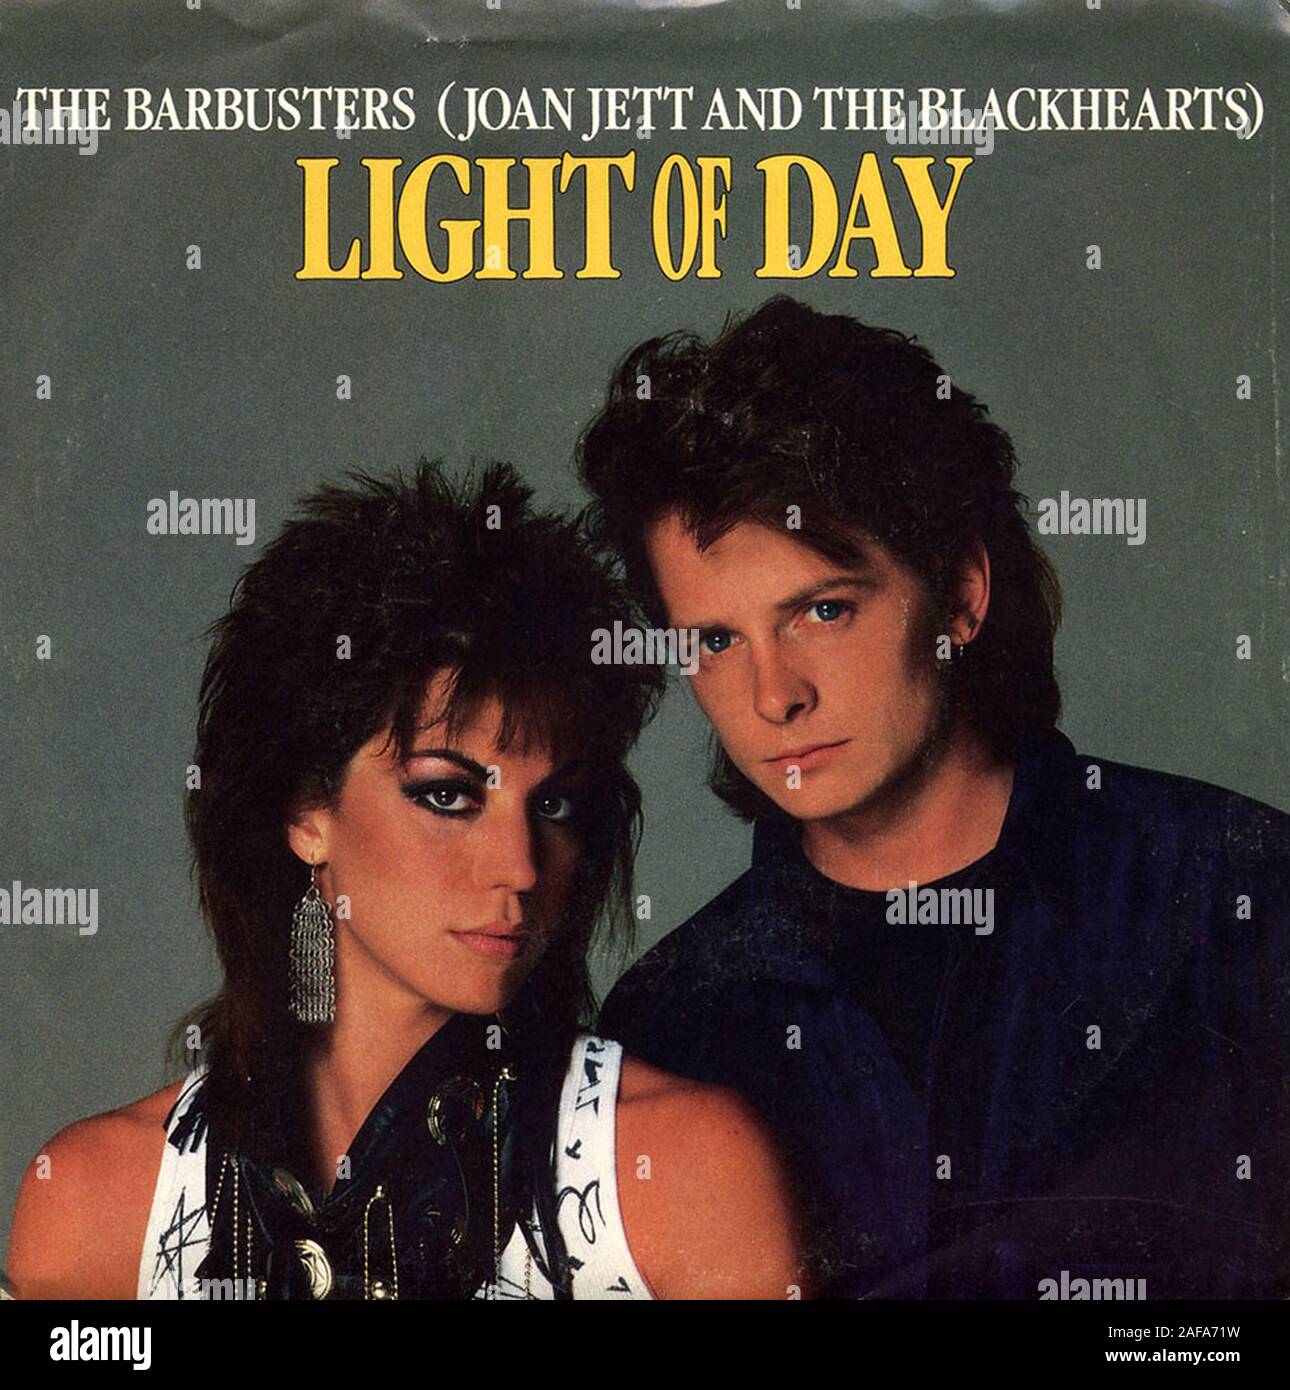 Barbusters - Joan Jett And The Blackhearts - Light Of Day - Vintage vinyl  album cover Stock Photo - Alamy